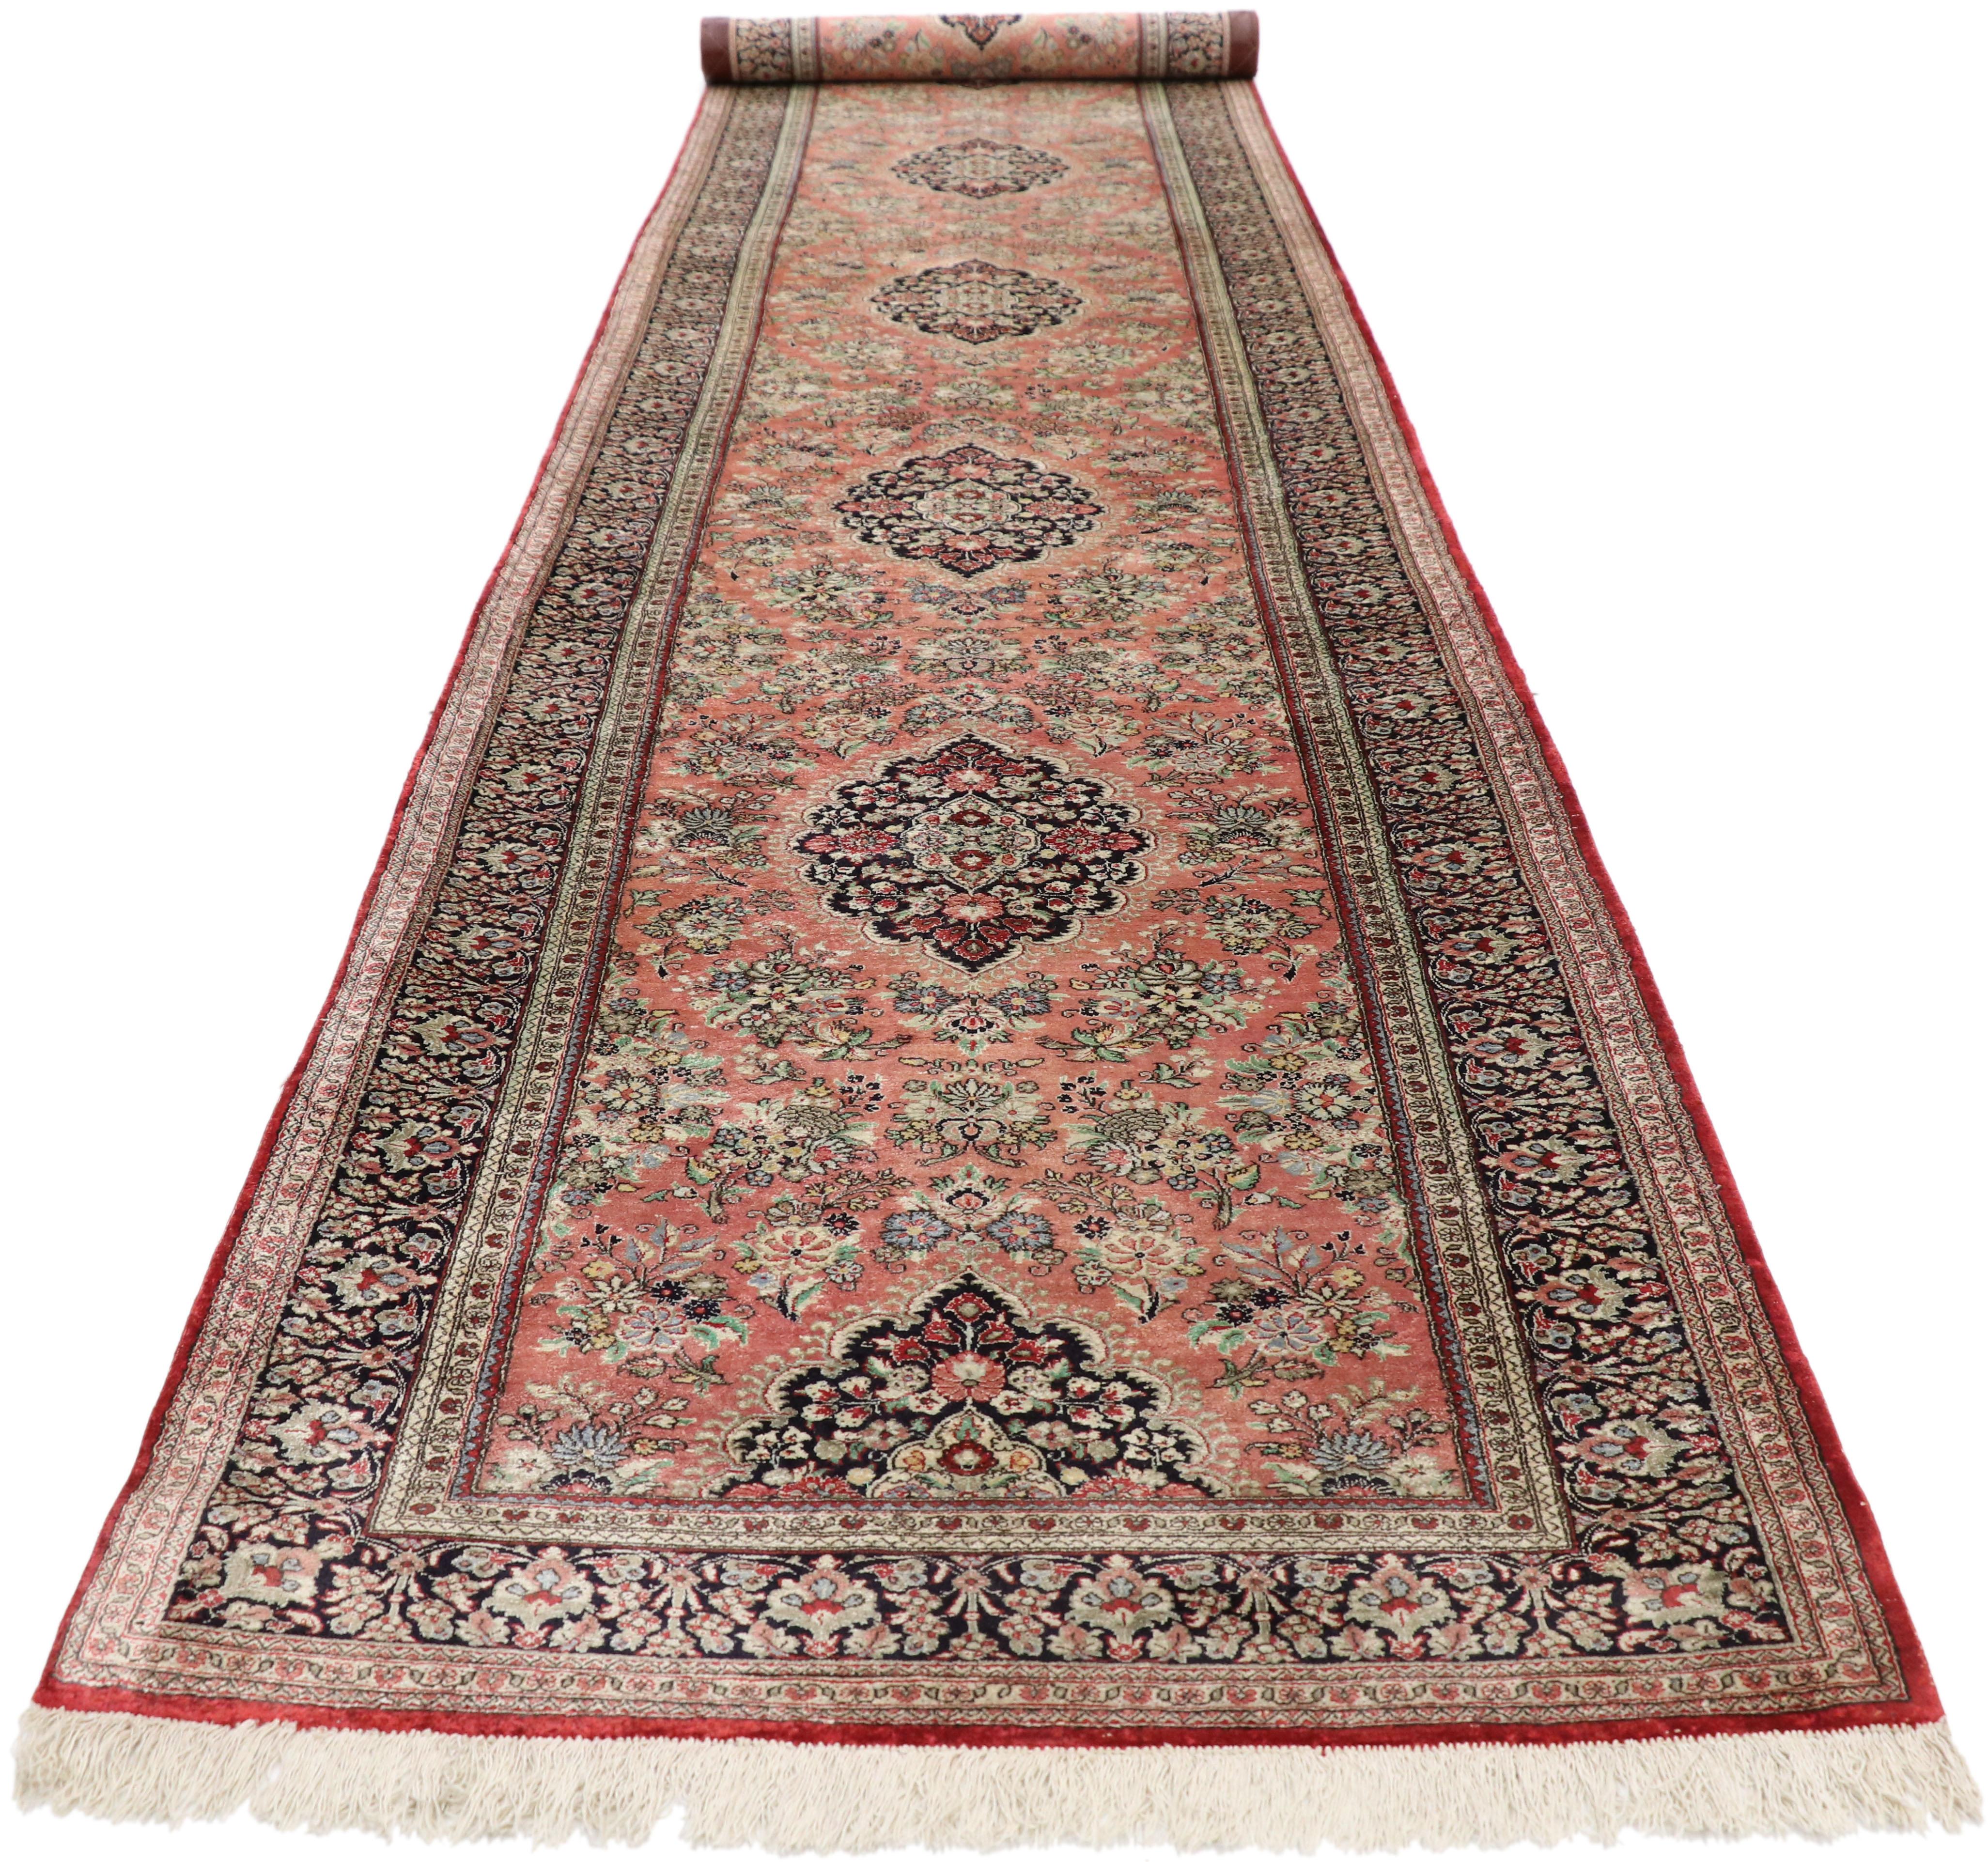 French Provincial Vintage Persian Silk Qum Rug, French Rococo Meets Perpetually Posh For Sale